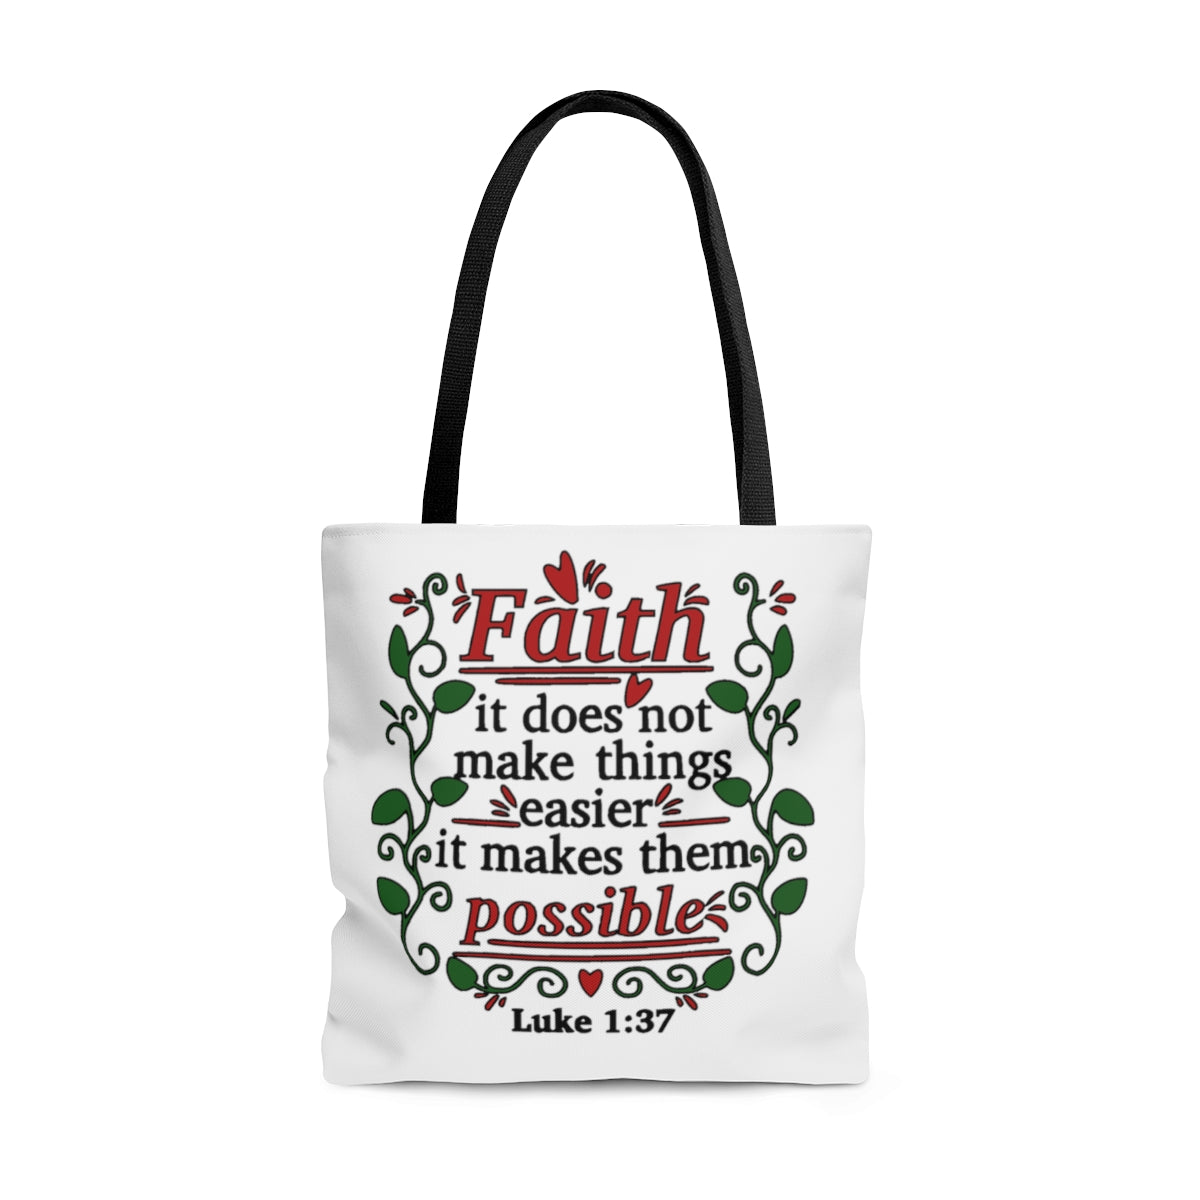 Faith-It-Does-Not-Make-Things-Easier-It-Makes-Them-Possible-Luke-1:37-Tote/shopping-bag